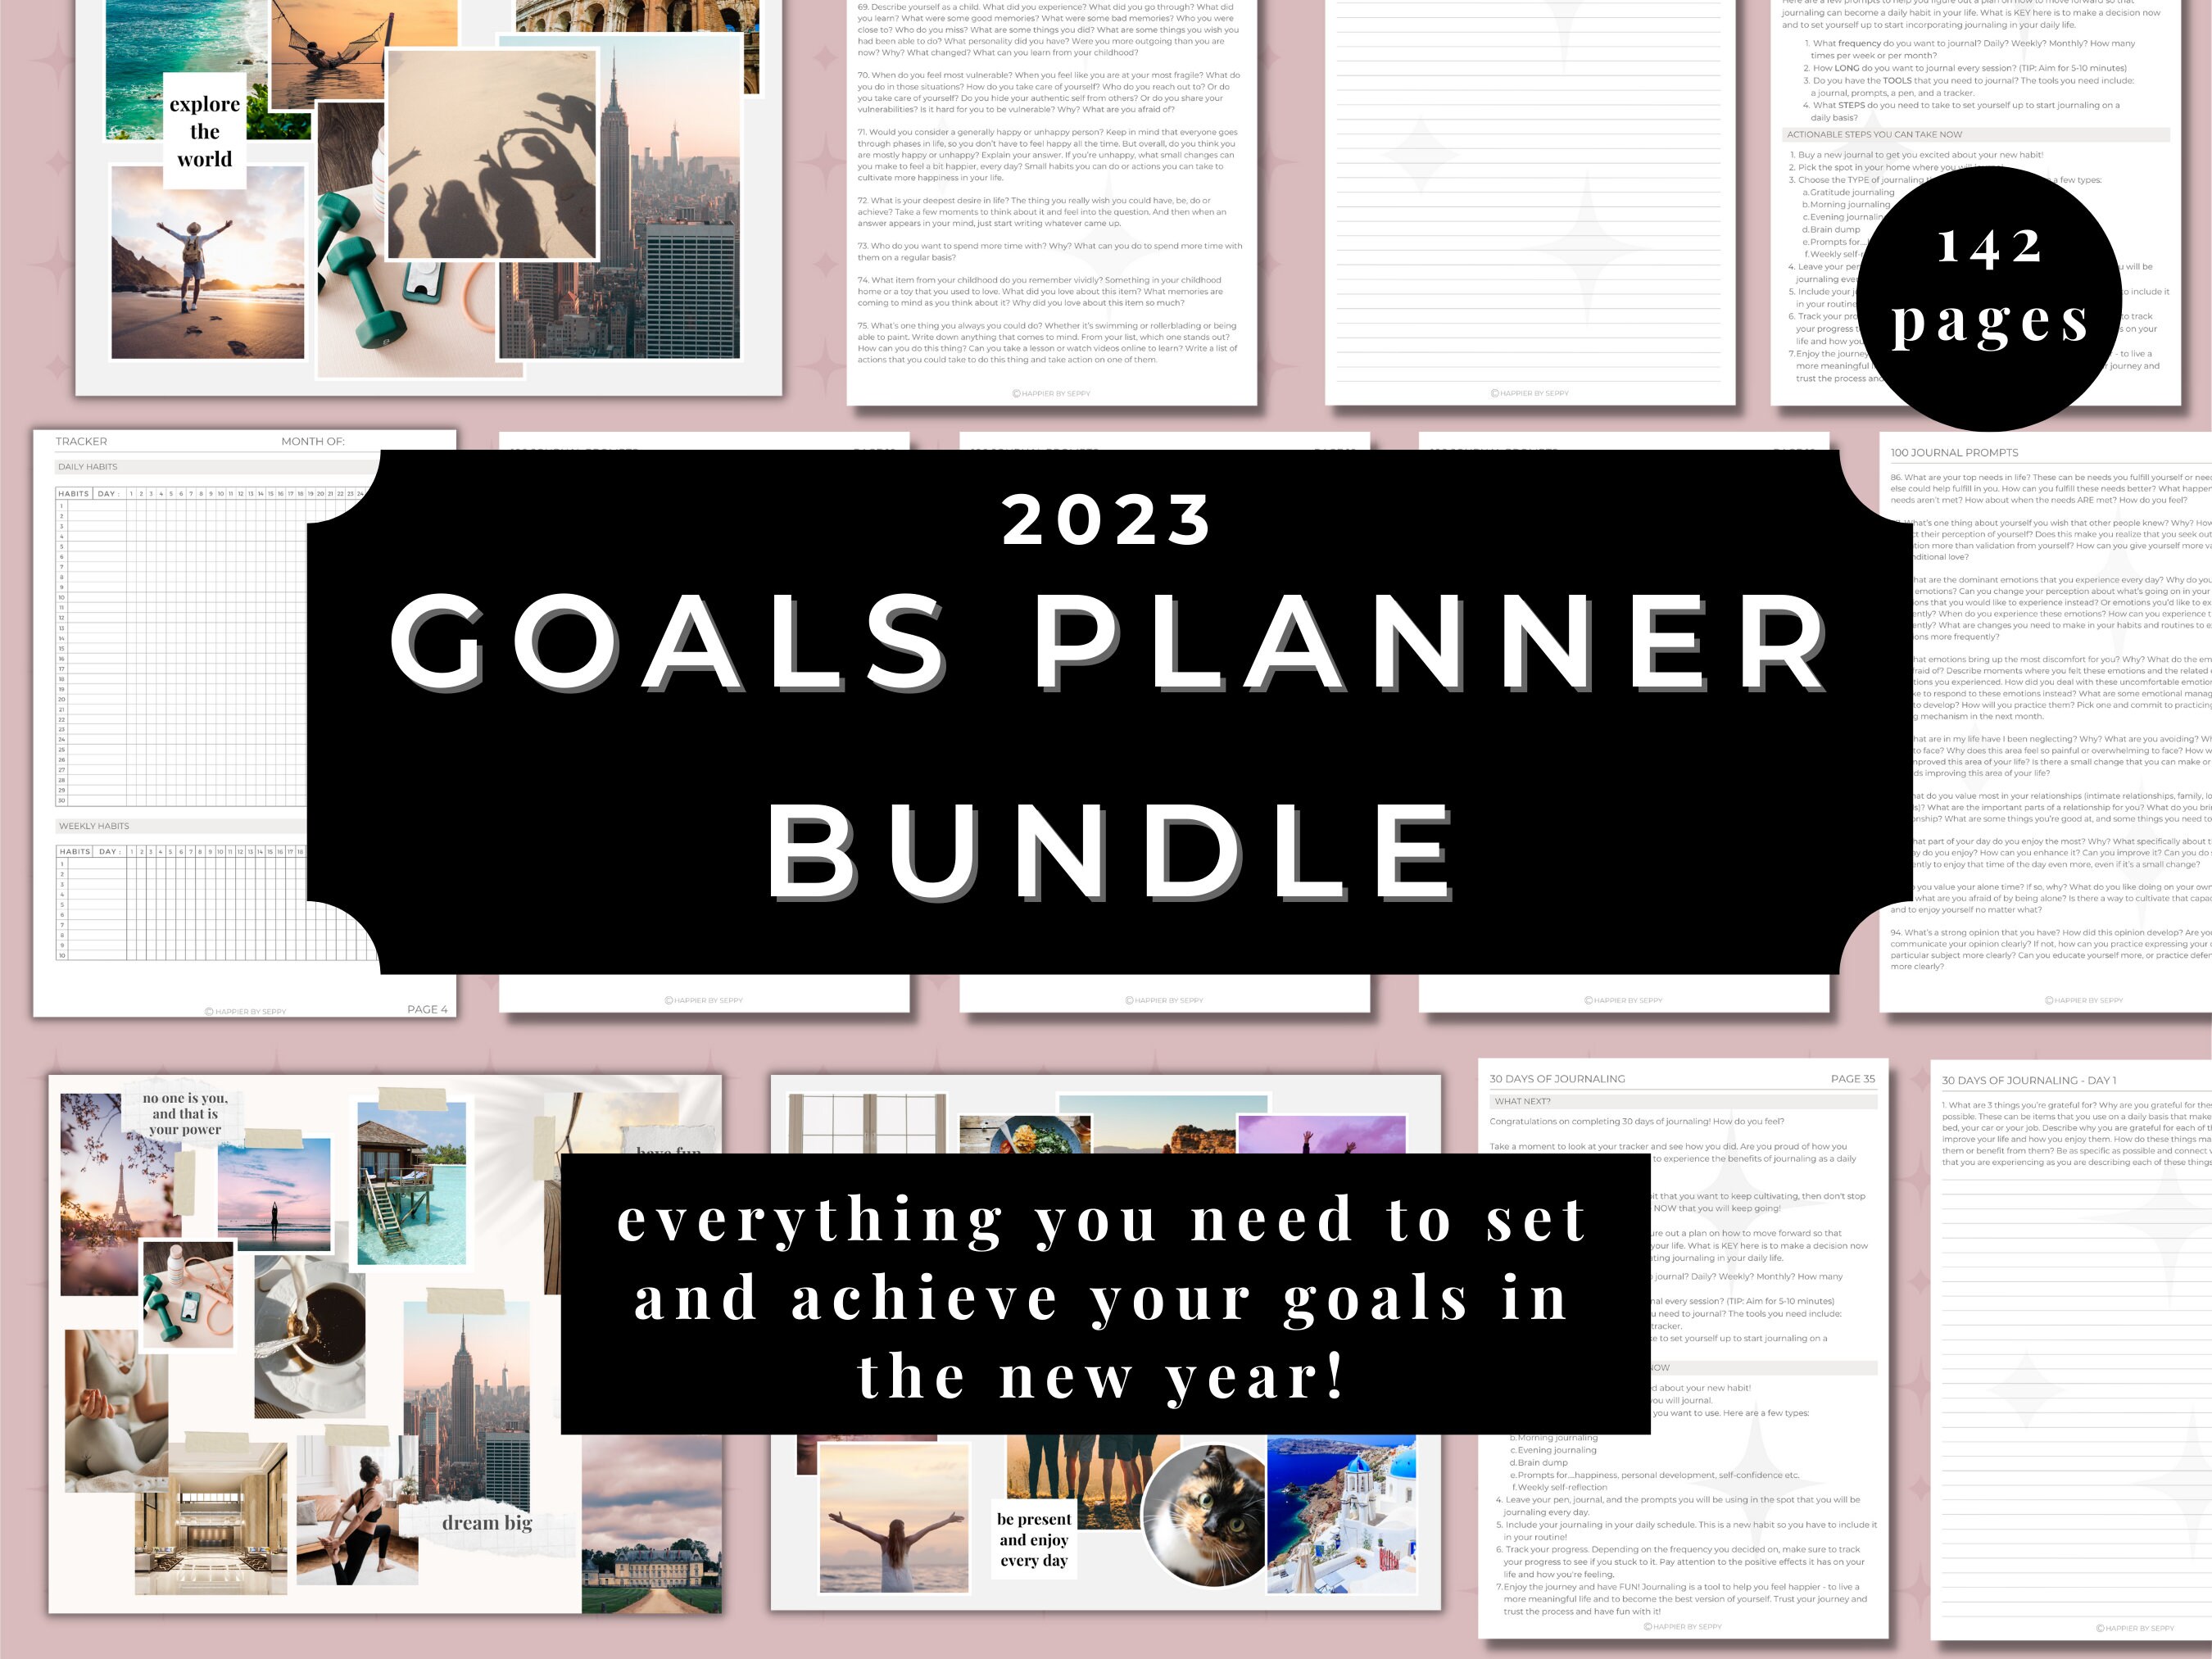 GOAL-SETTING BUNDLE v2 to Set and Achieve Your 2023 Goals - Etsy Canada